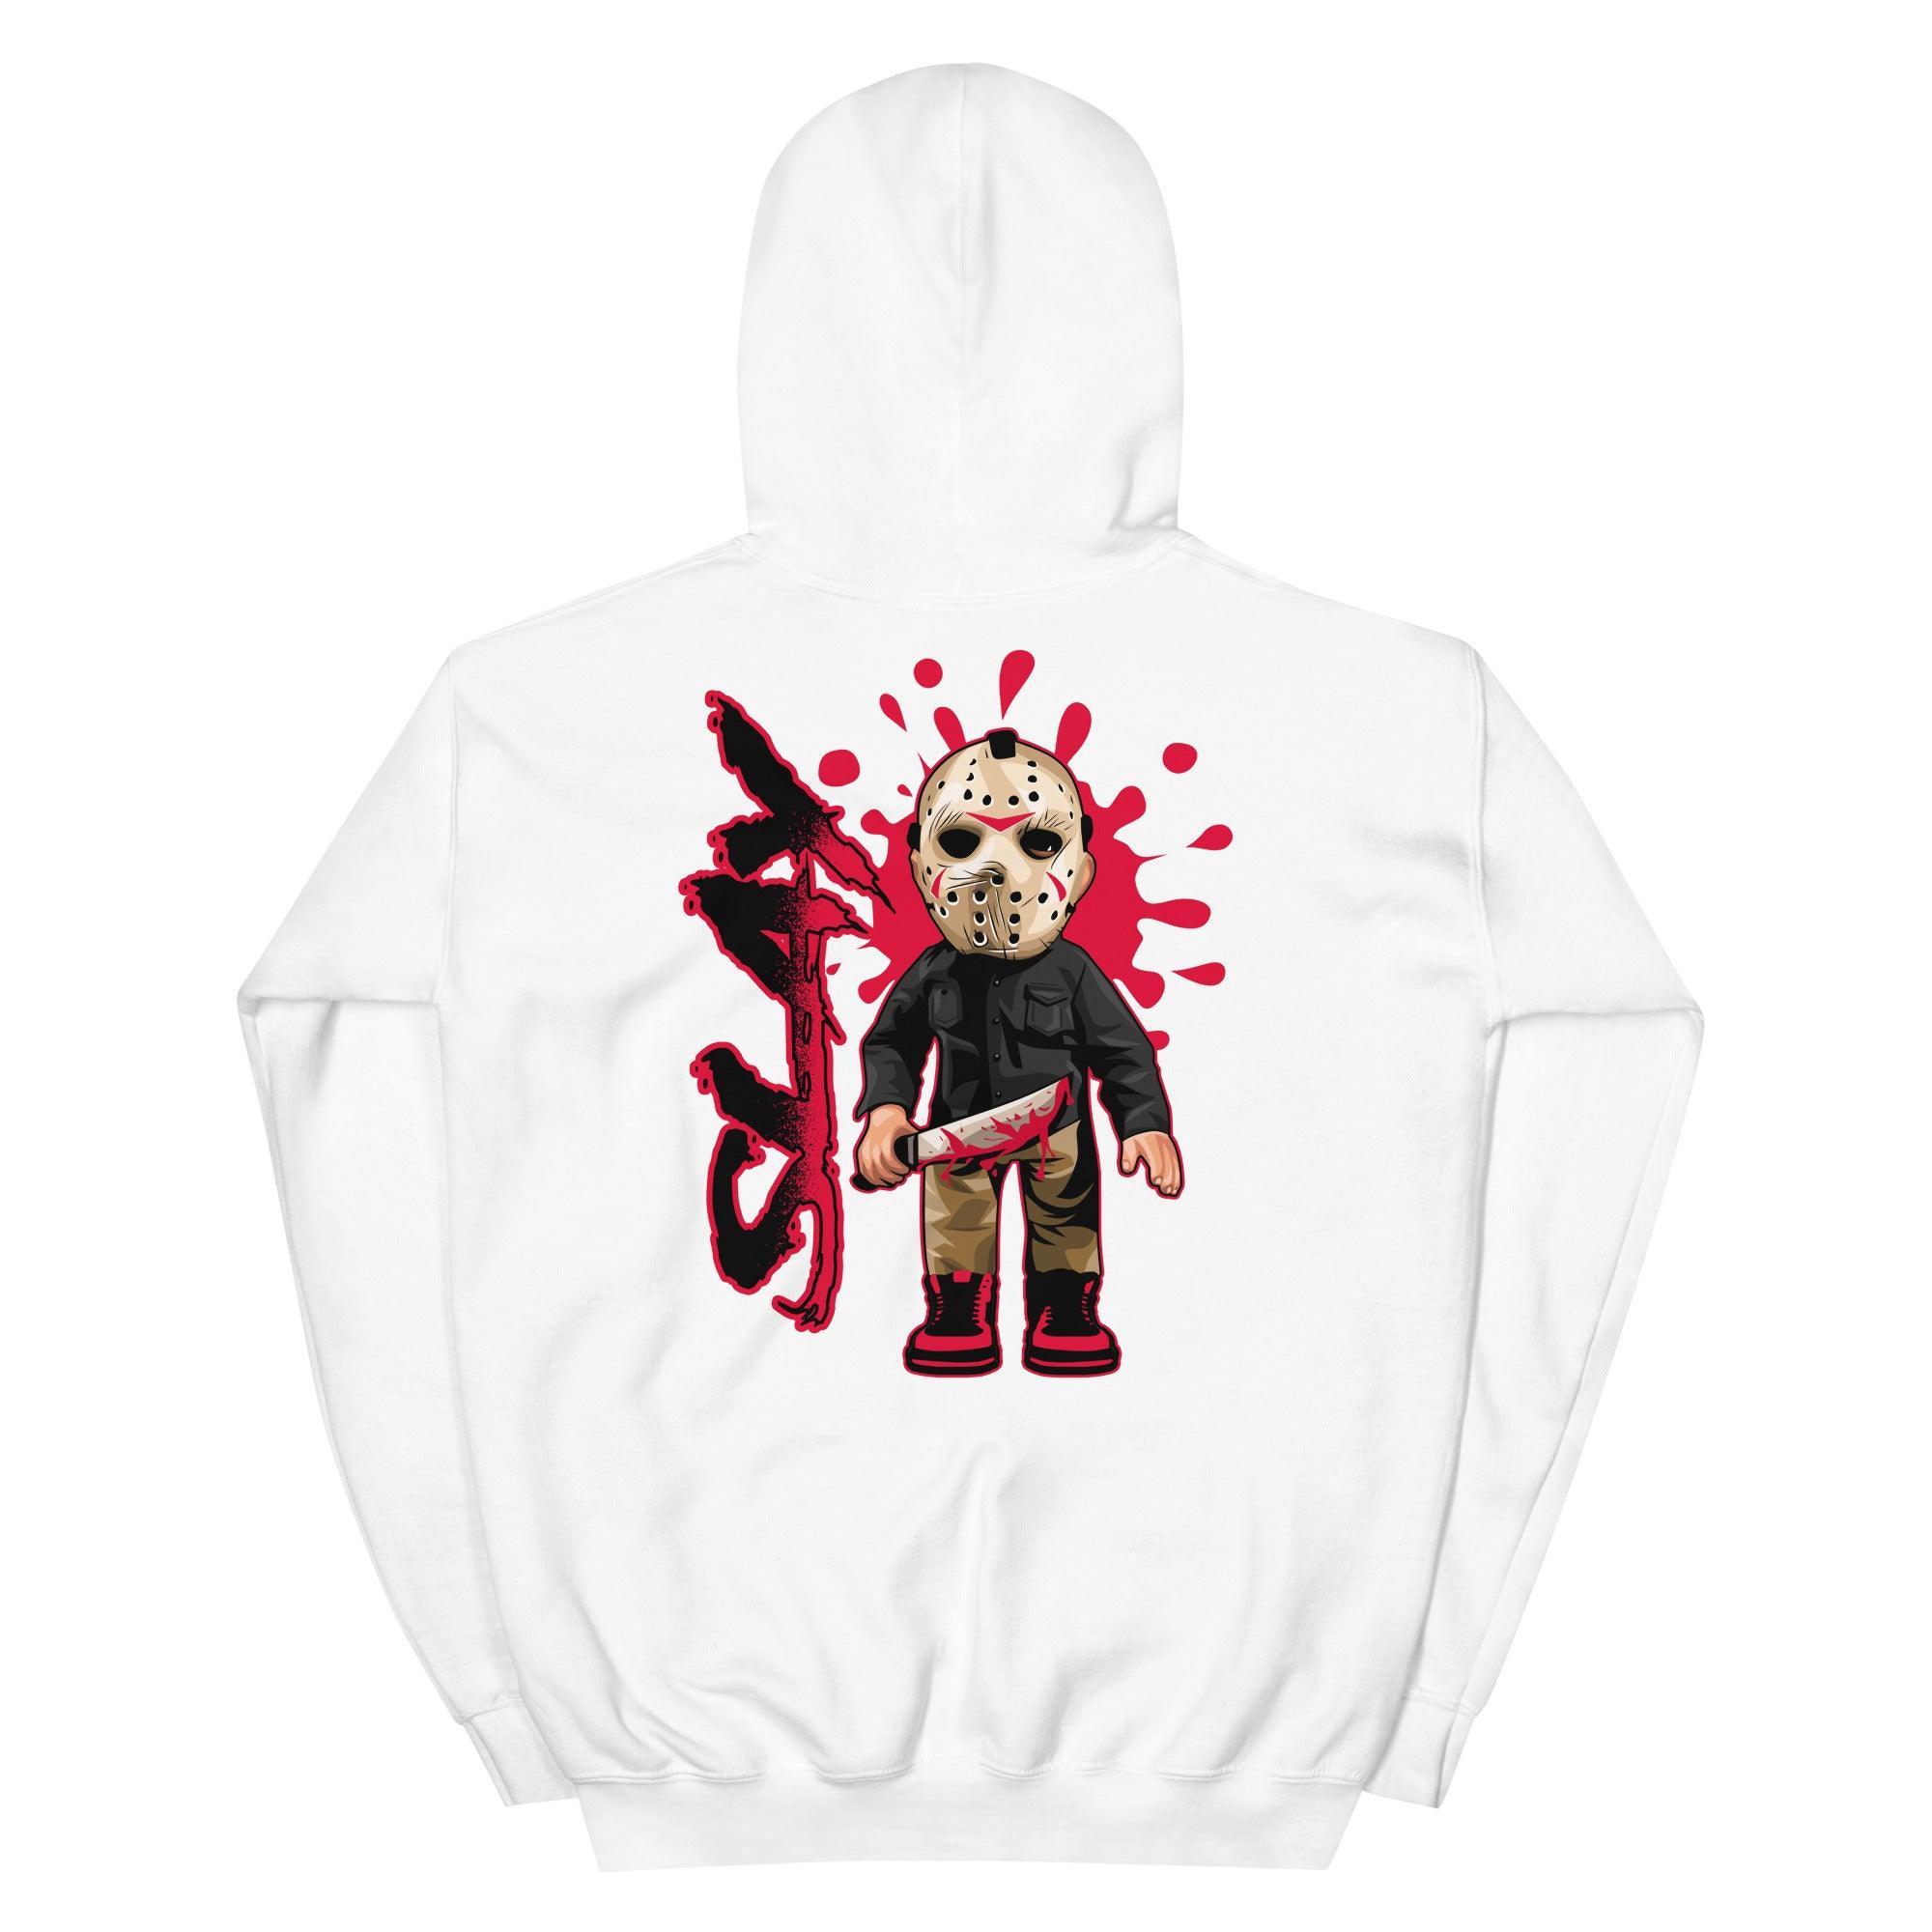 AJ 4 Red Thunder Hoodie - Slay - Sneaker Shirts Outlet